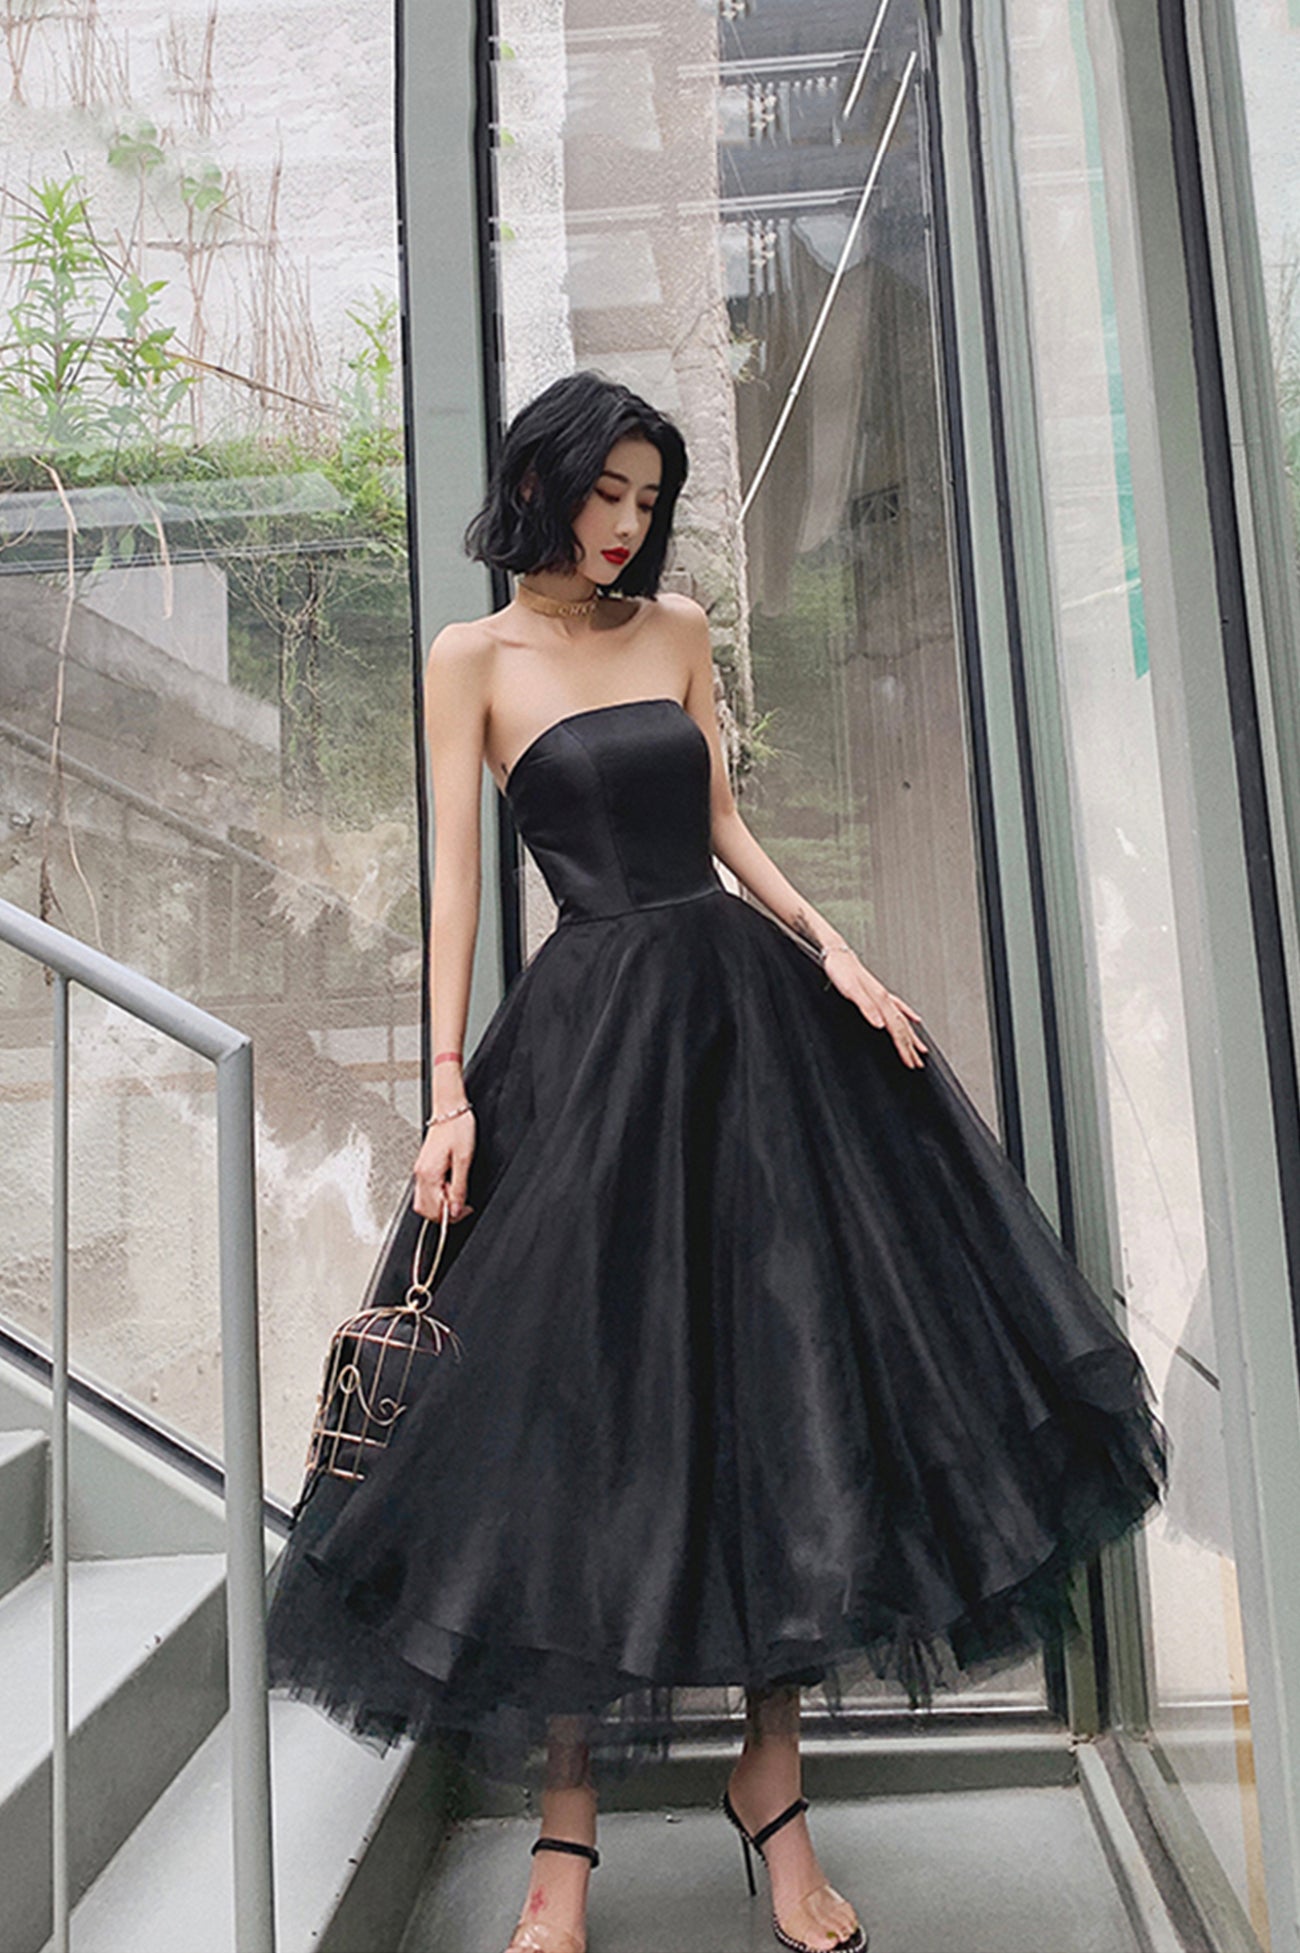 Black Tulle Short Prom Dress, Black Strapless Party Homecoming Dress